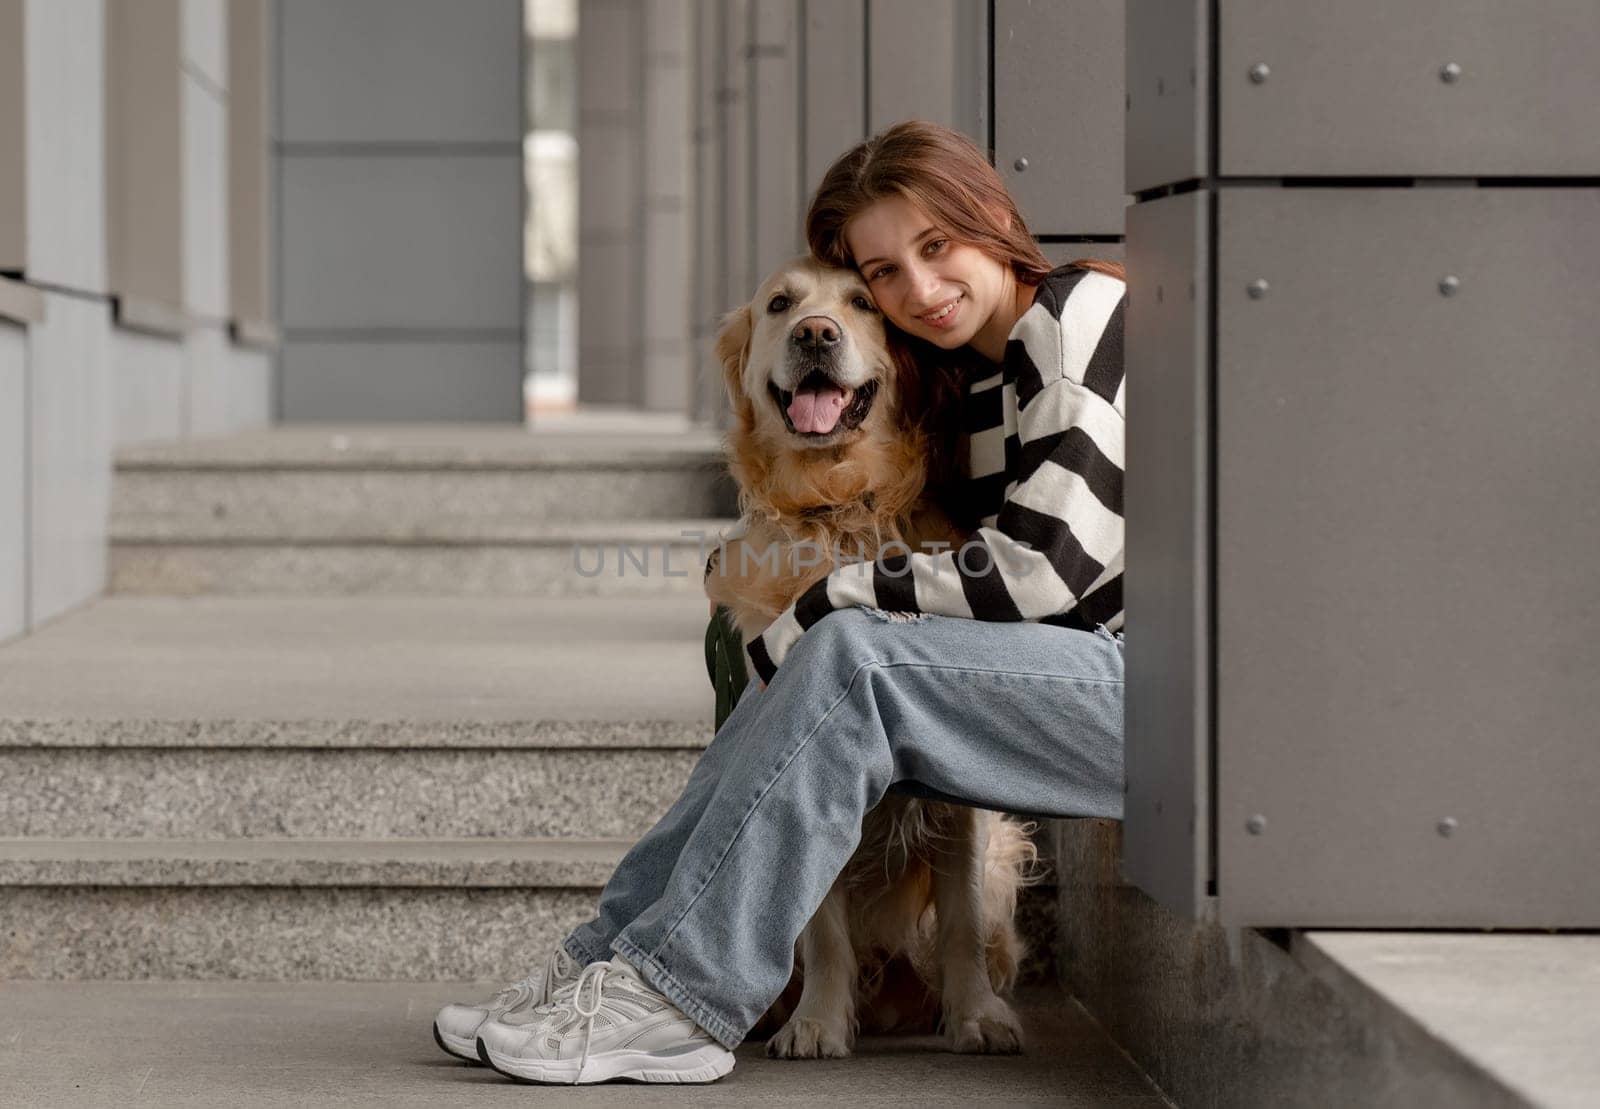 Teen Girl With Golden Retriever Sits In City by tan4ikk1